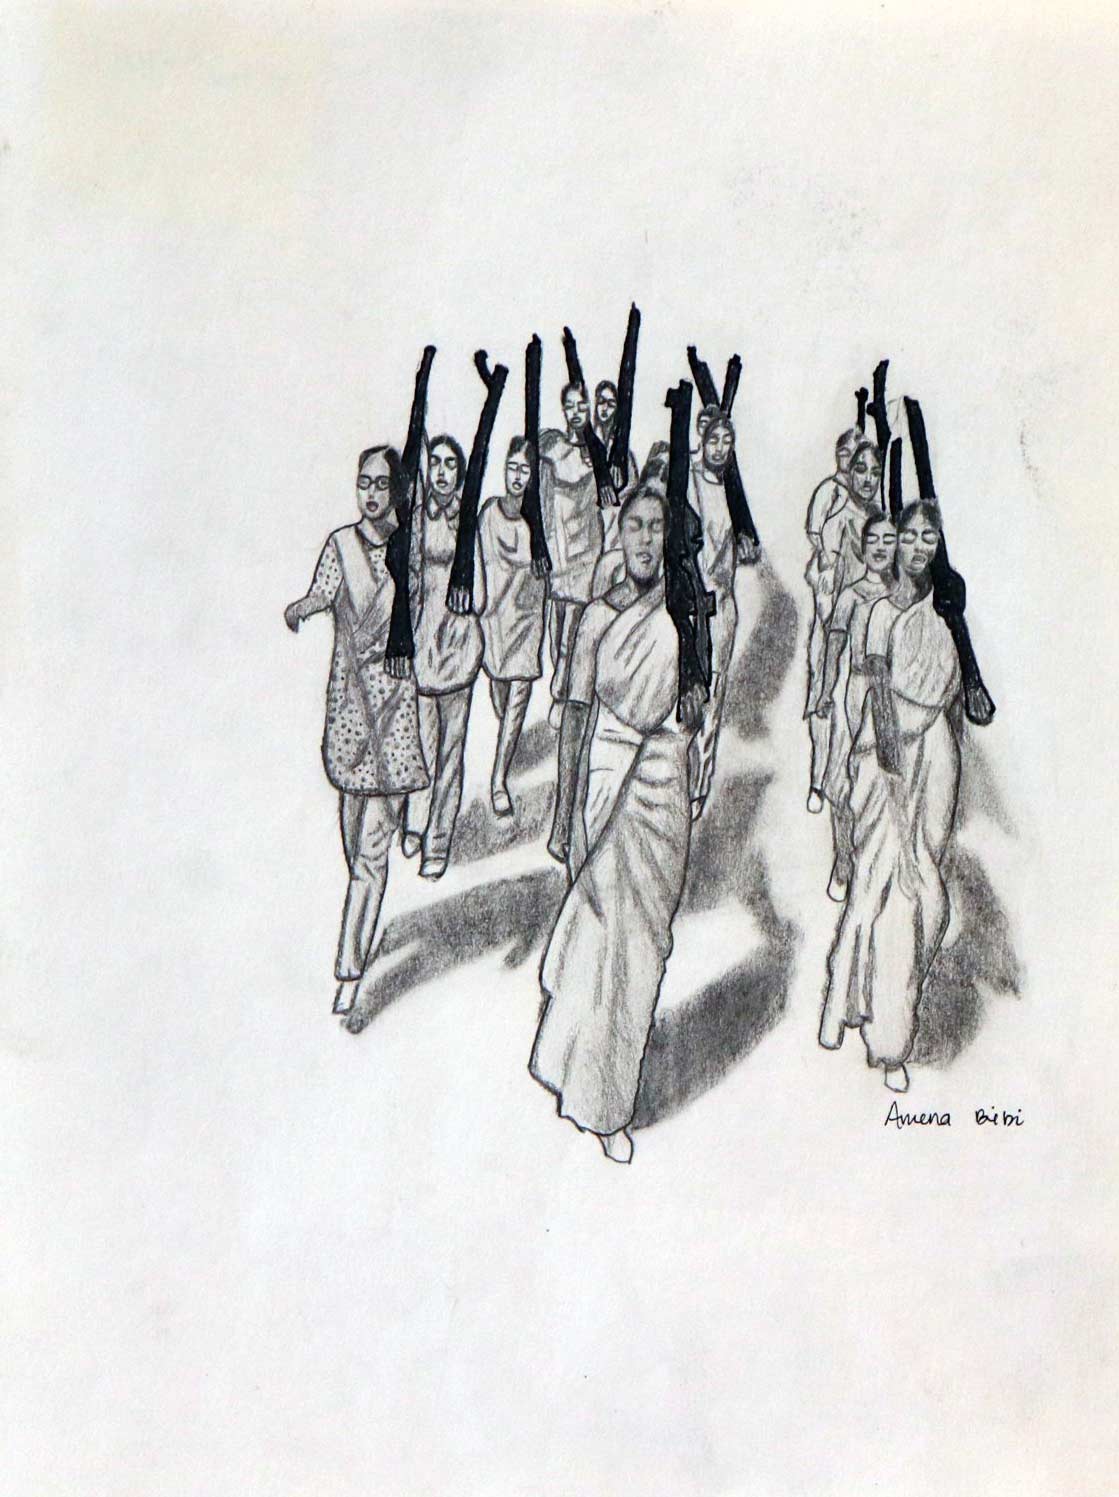 An illustration of a group of women carrying guns on their shoulders